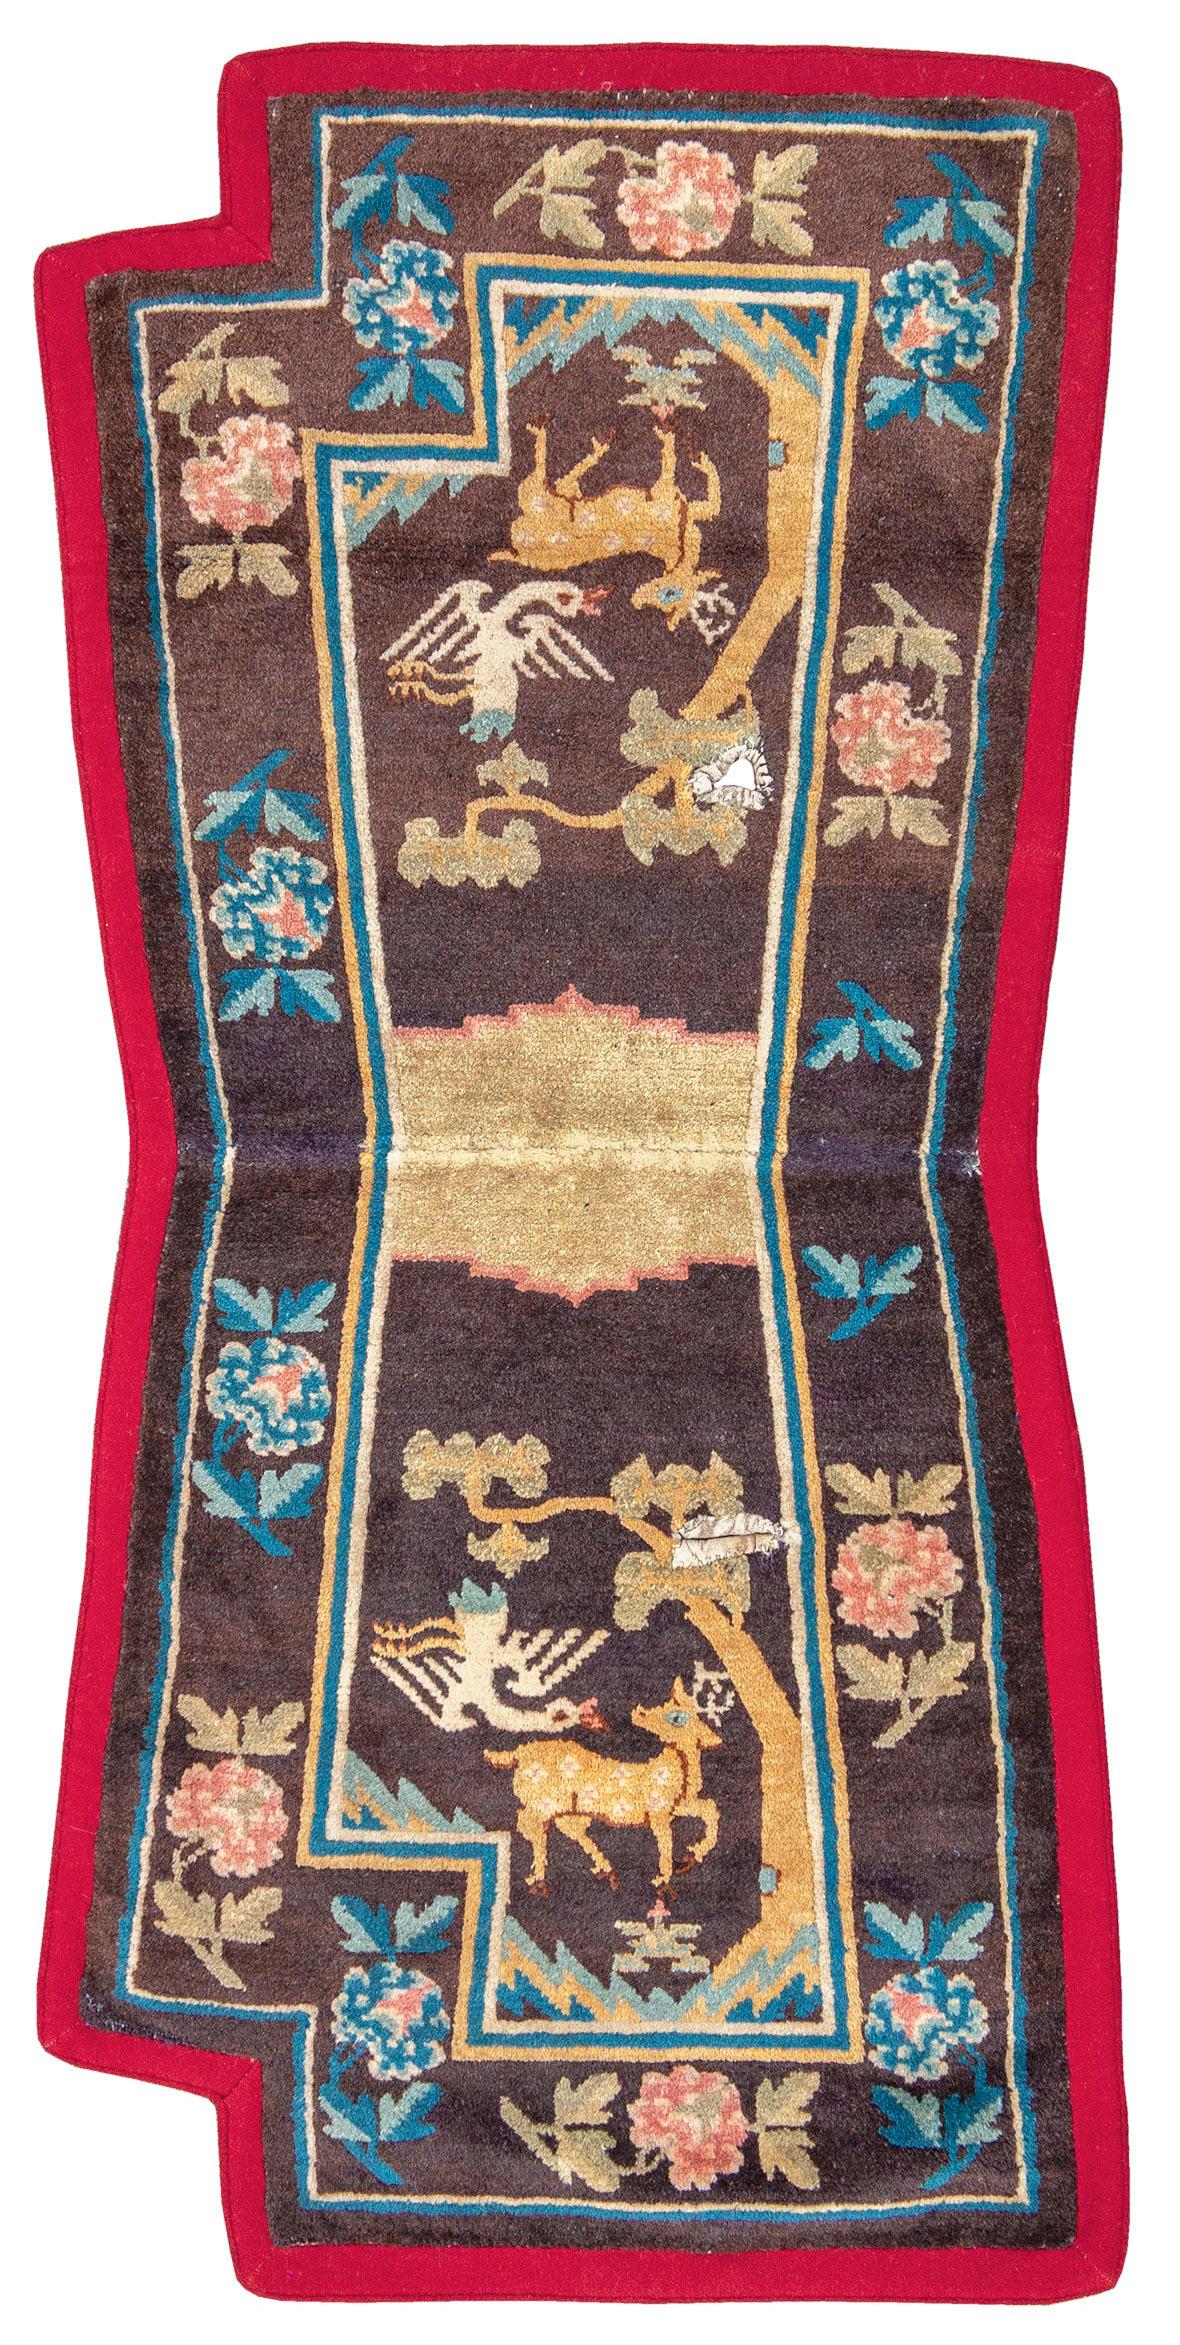 Set of Antique Mongolian Horse Saddle Rugs, Late 19th Century

One rarely sees complete saddle sets from East Asia, or does one see a saddle rug from Mongolia very often either. Obviously rare, the set features the classic palette associated with